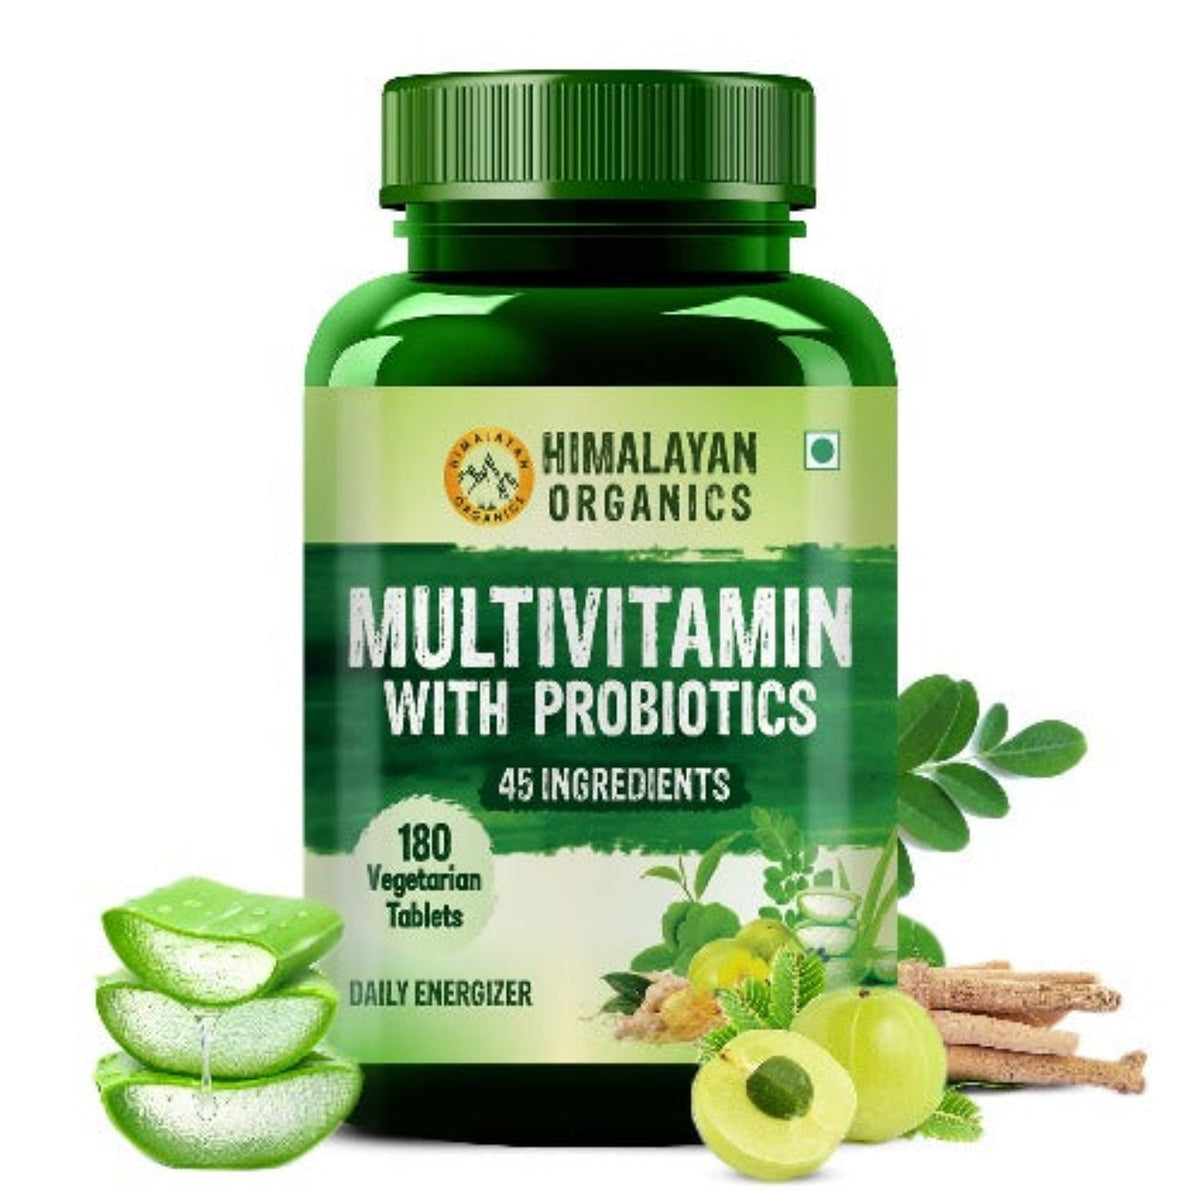 Himalayan Organics Multivitamin For Men & Women With 45 Ingredients 180 Tablets With Probiotics